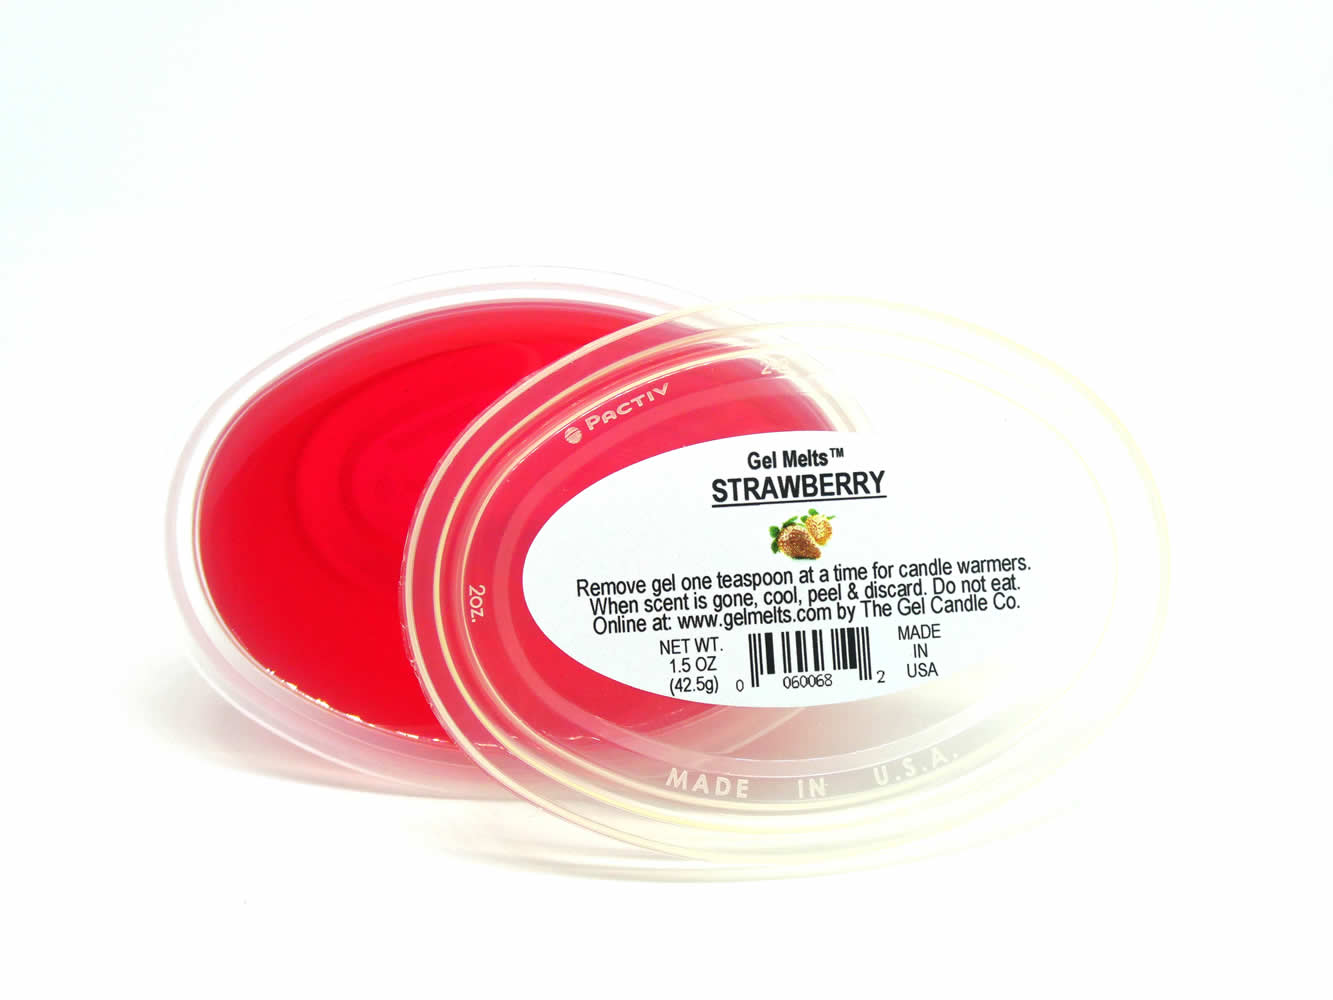 Strawberry scented Gel Melts™ Gel Wax for warmers - 3 pack - Click Image to Close